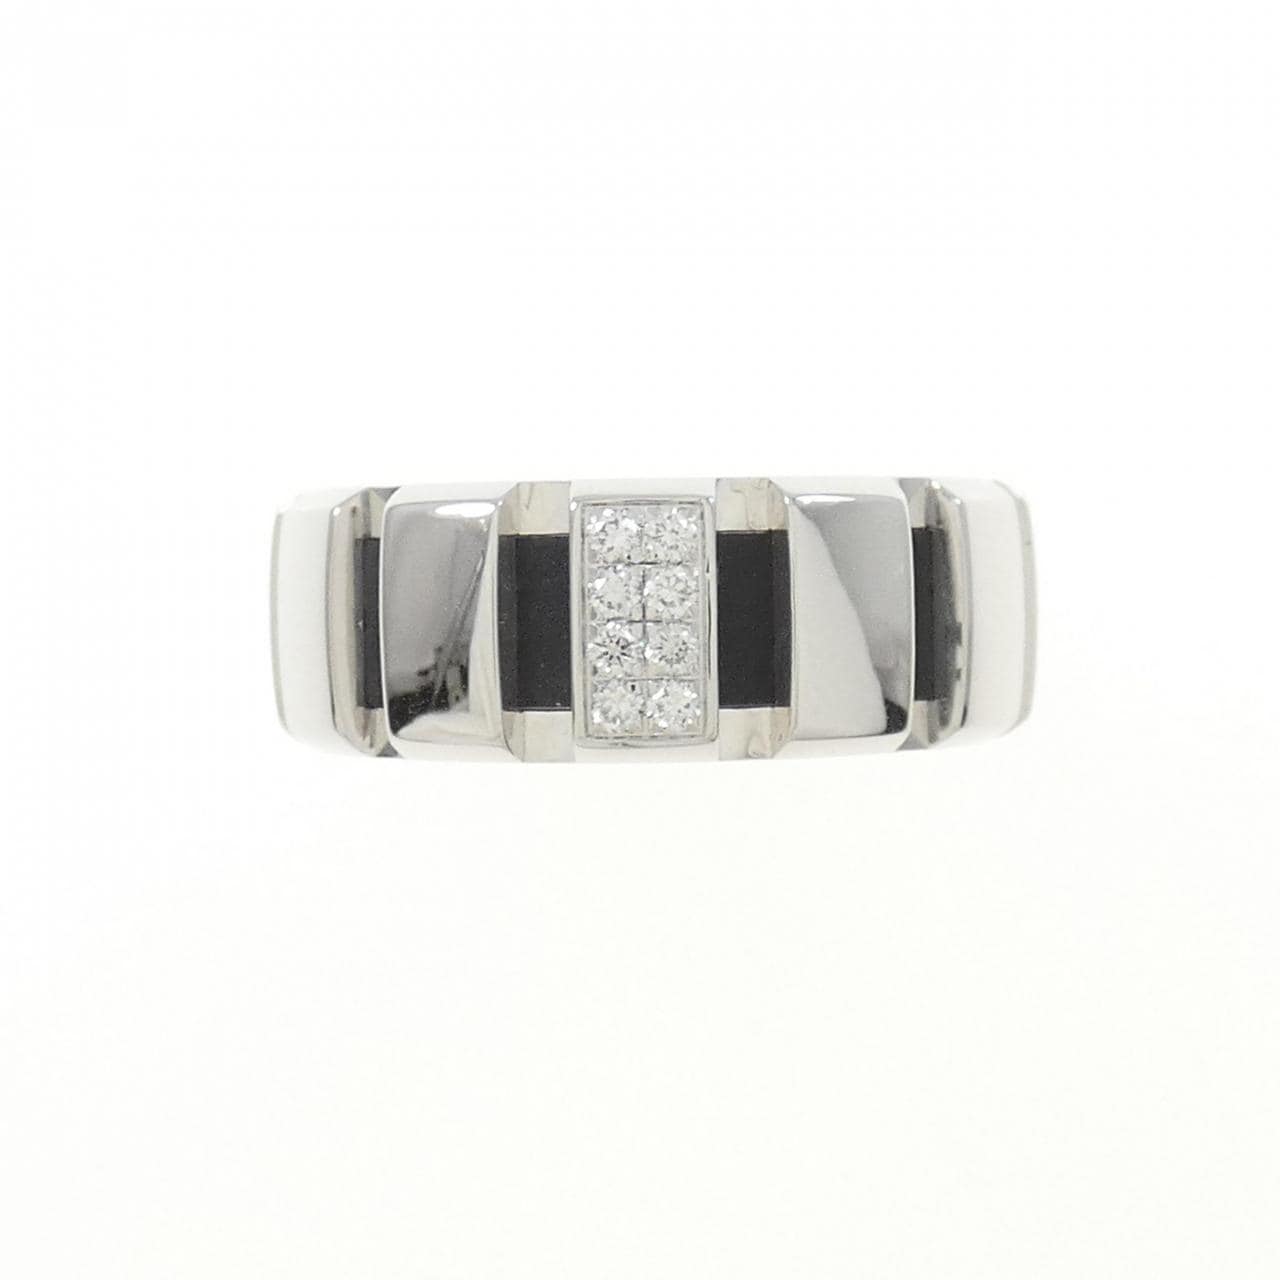 CHAUMET class one small ring